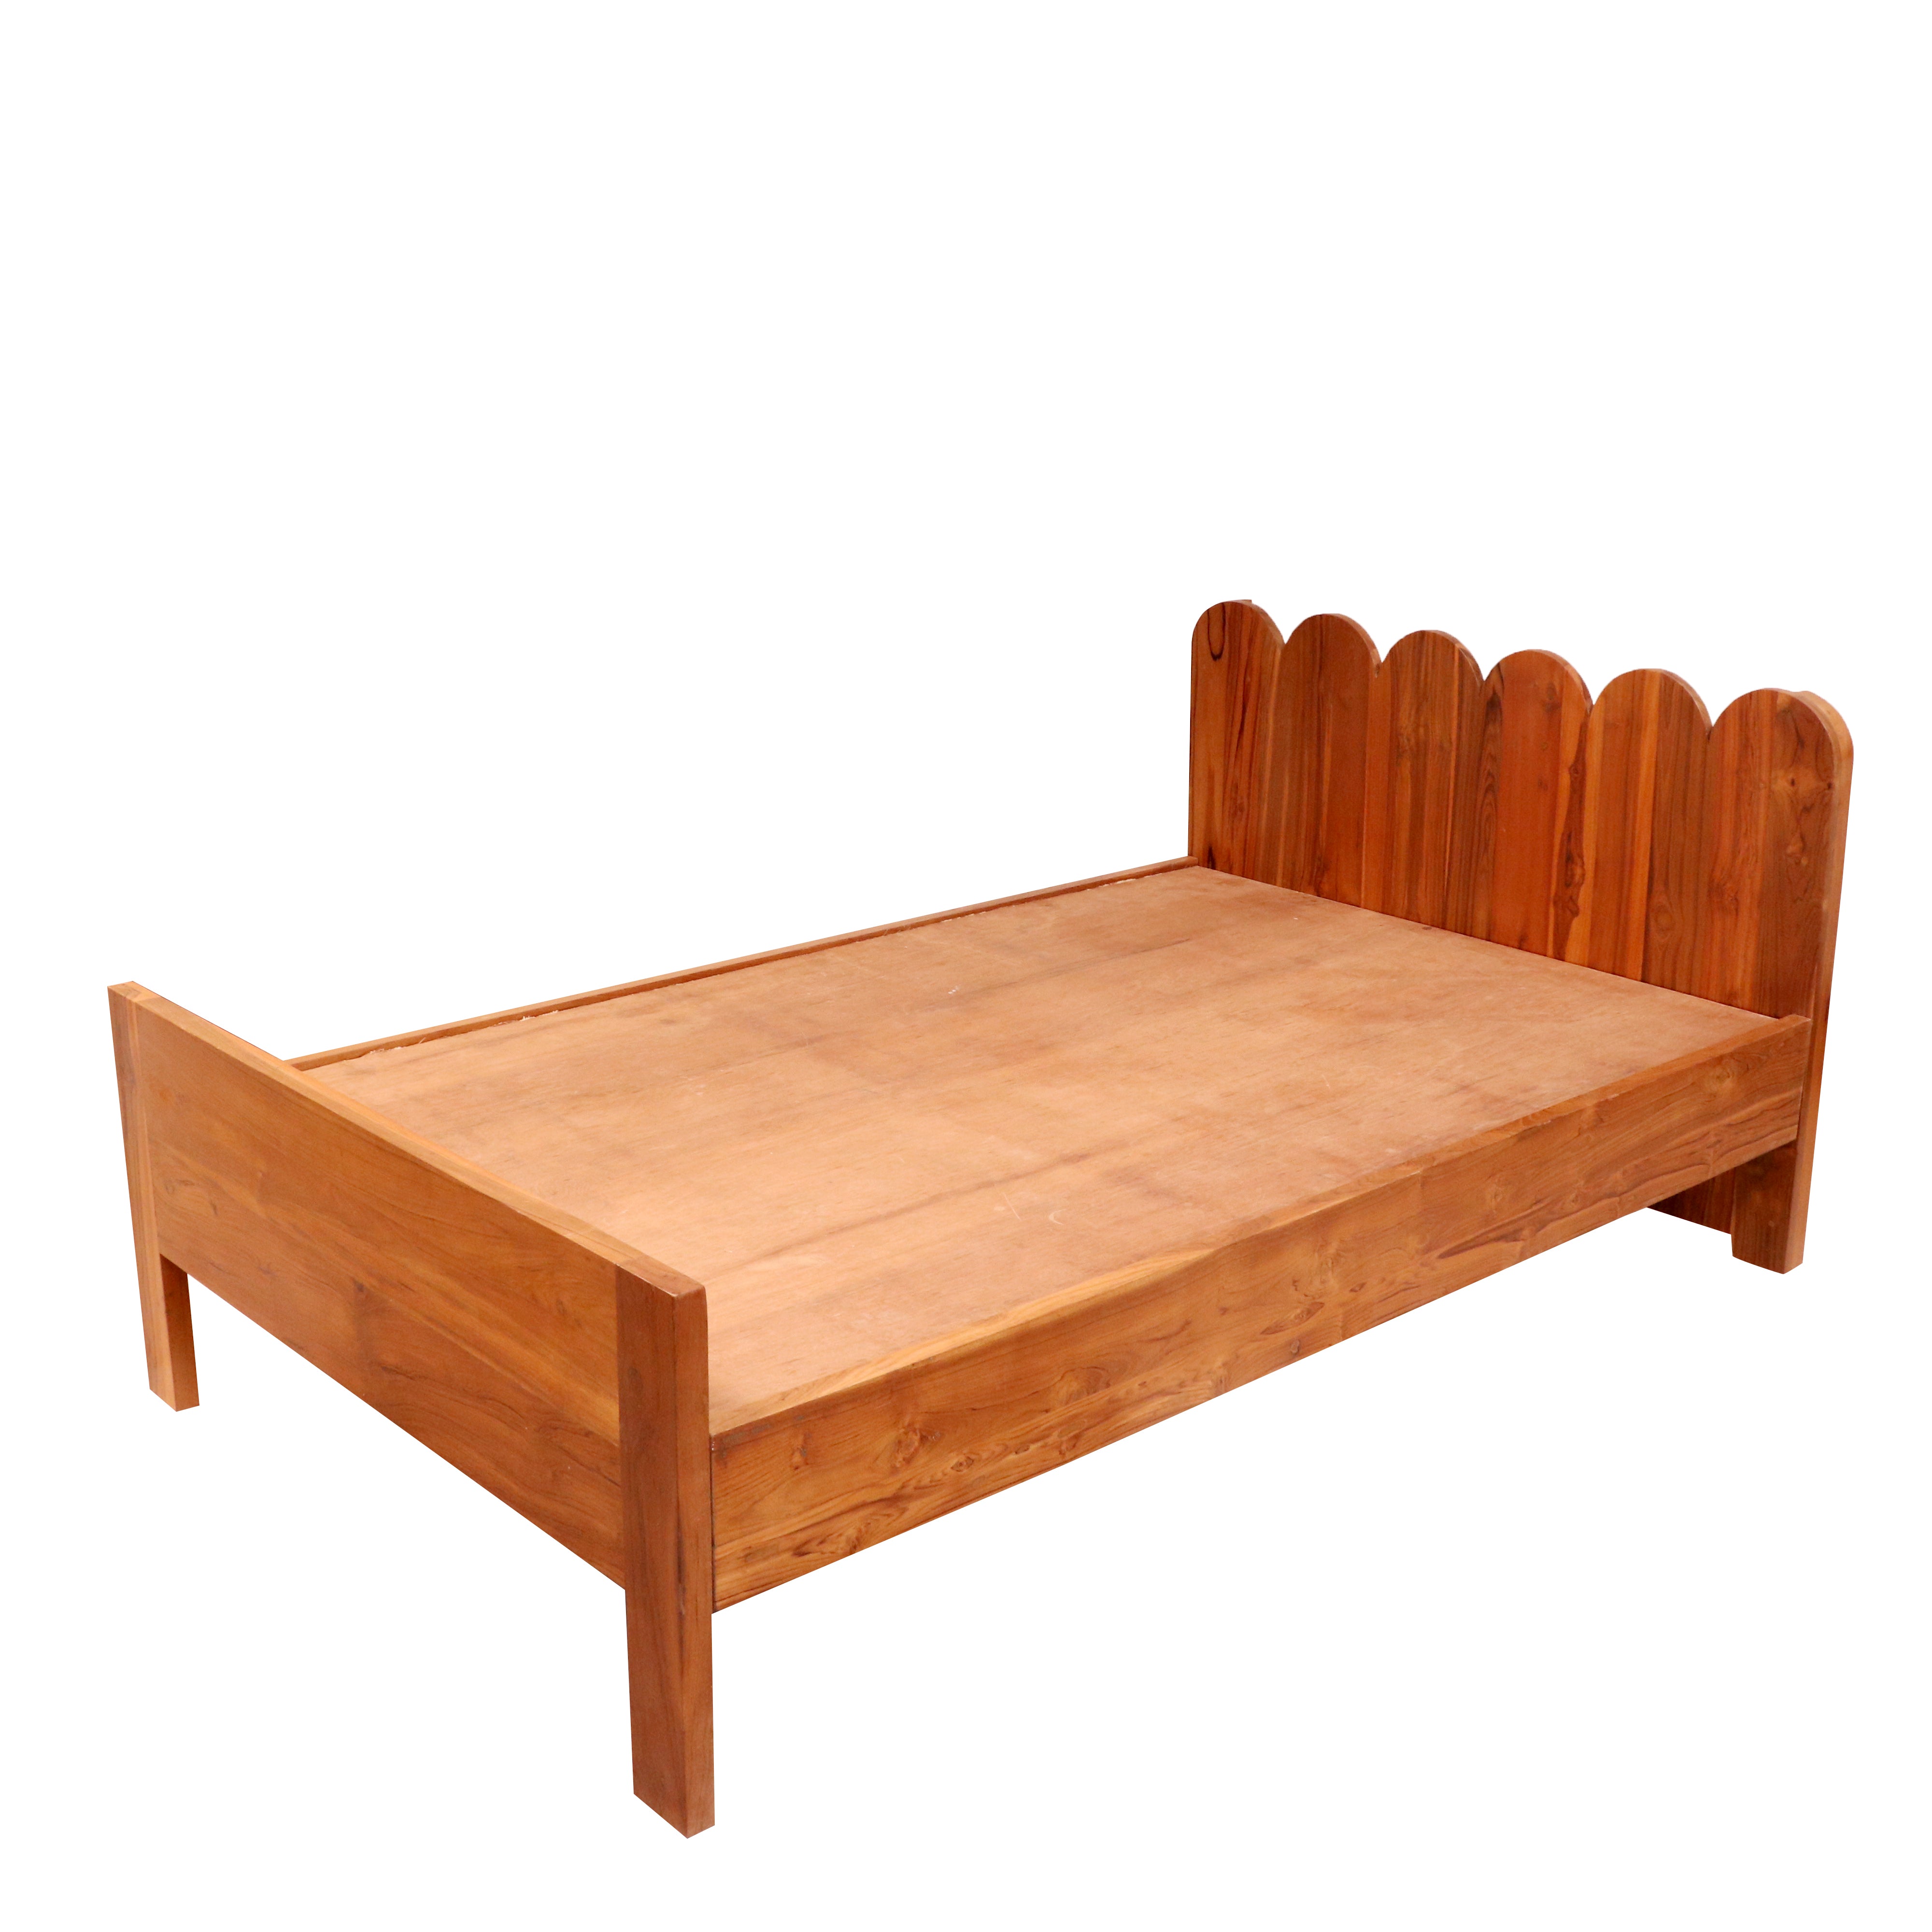 Retro Classic Natural Handmade Elegant Wooden Bed for Home Bed